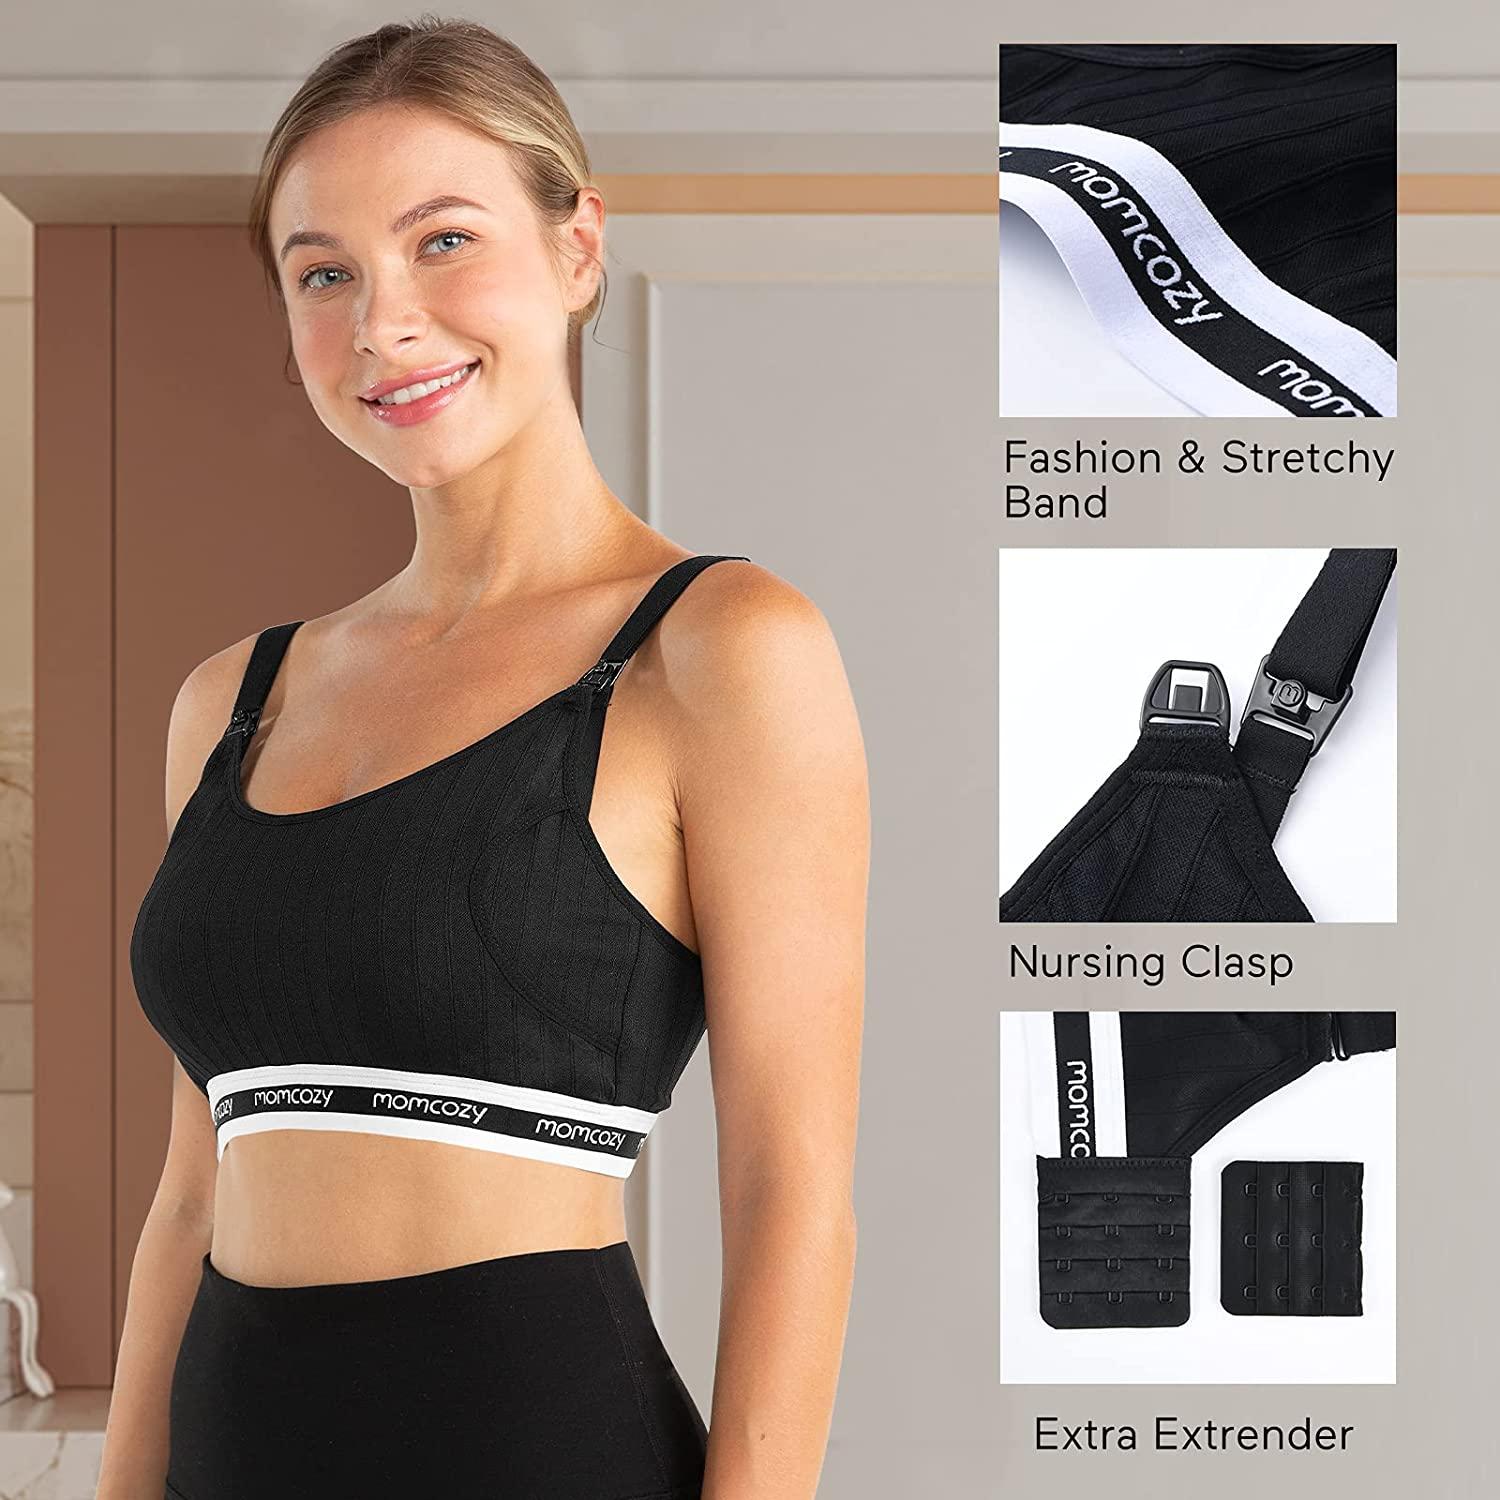 Momcozy Seamless Pumping Bra Hands Free, Comfort and Great Support